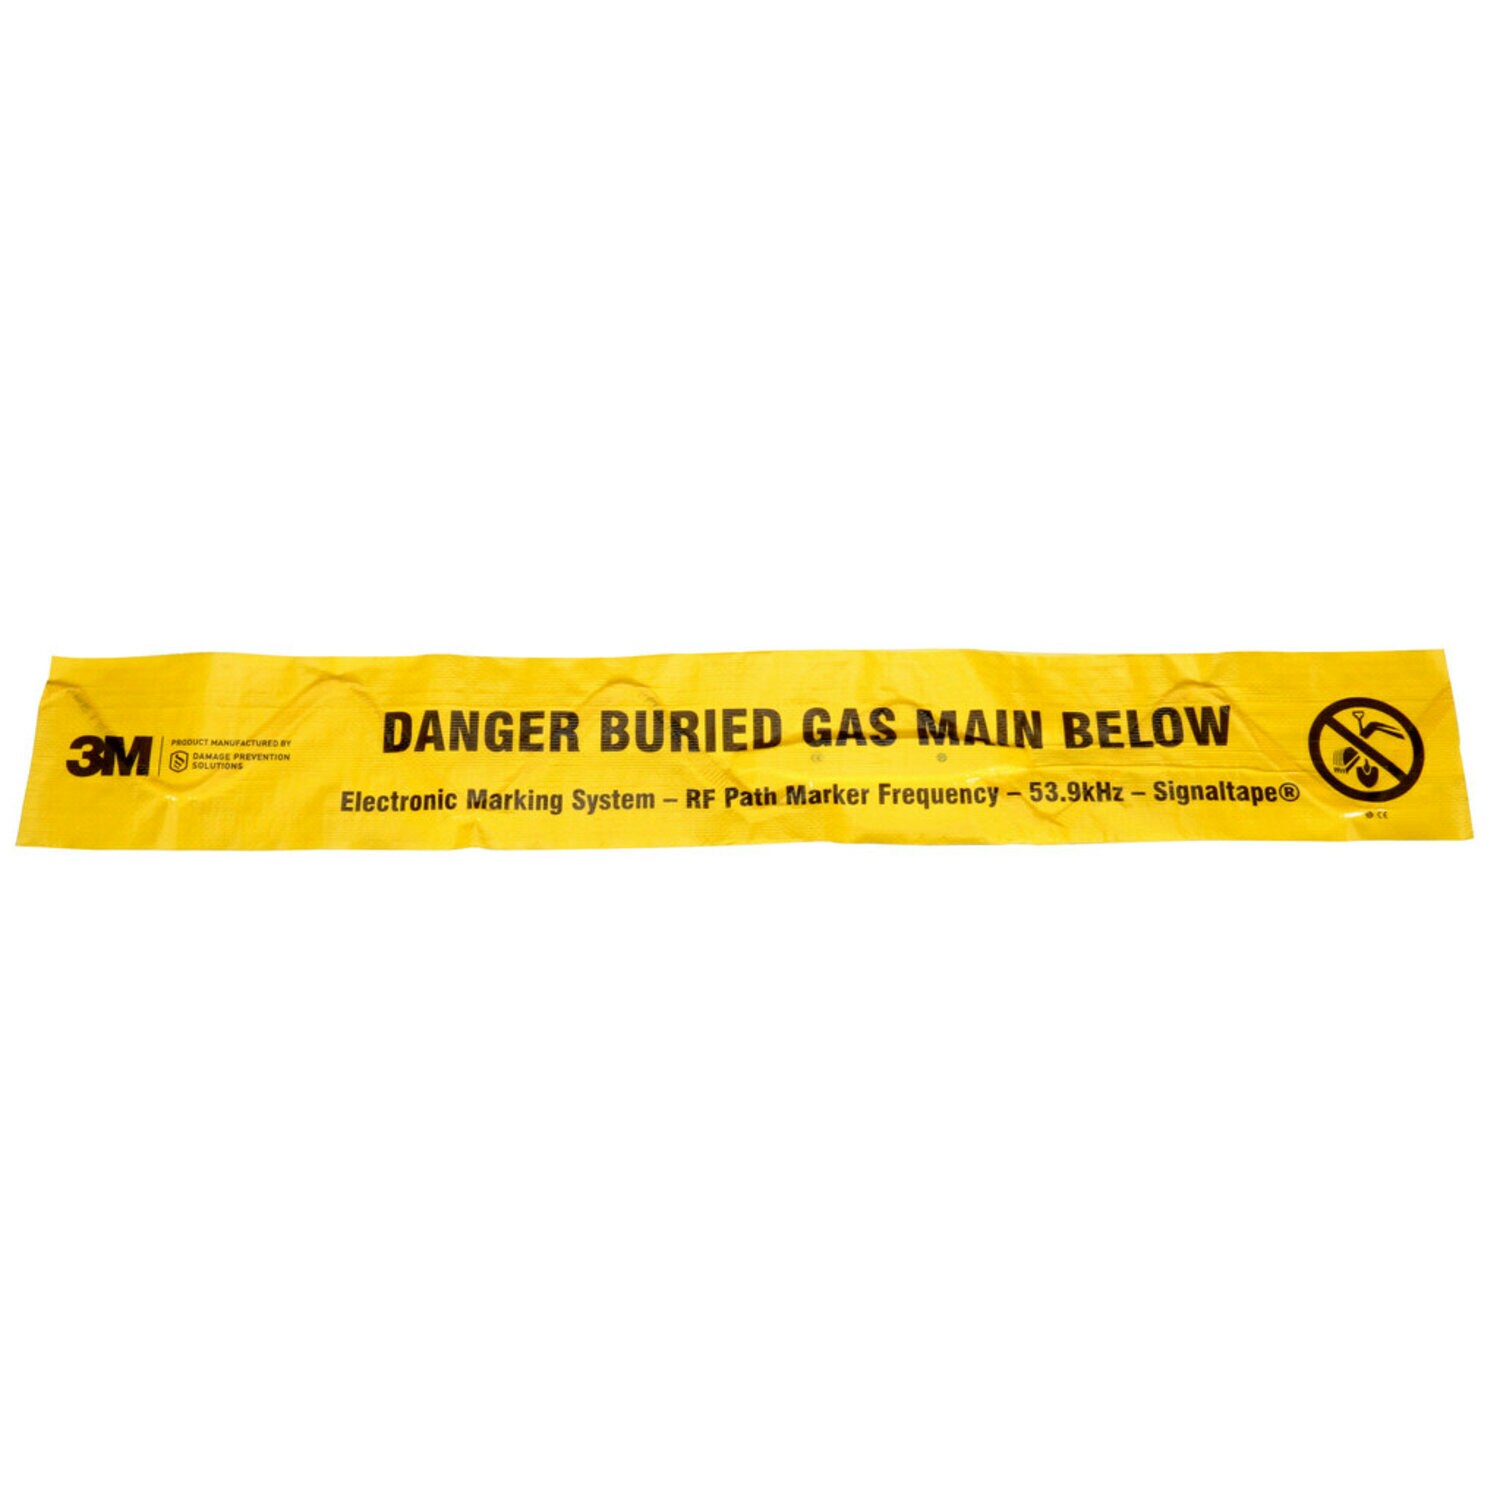 7100254502 - 3M Electronic Marking System (EMS) Warning Tape 7905-XT, Yellow, 4 in, Gas, 500ft, 1 Box/Case